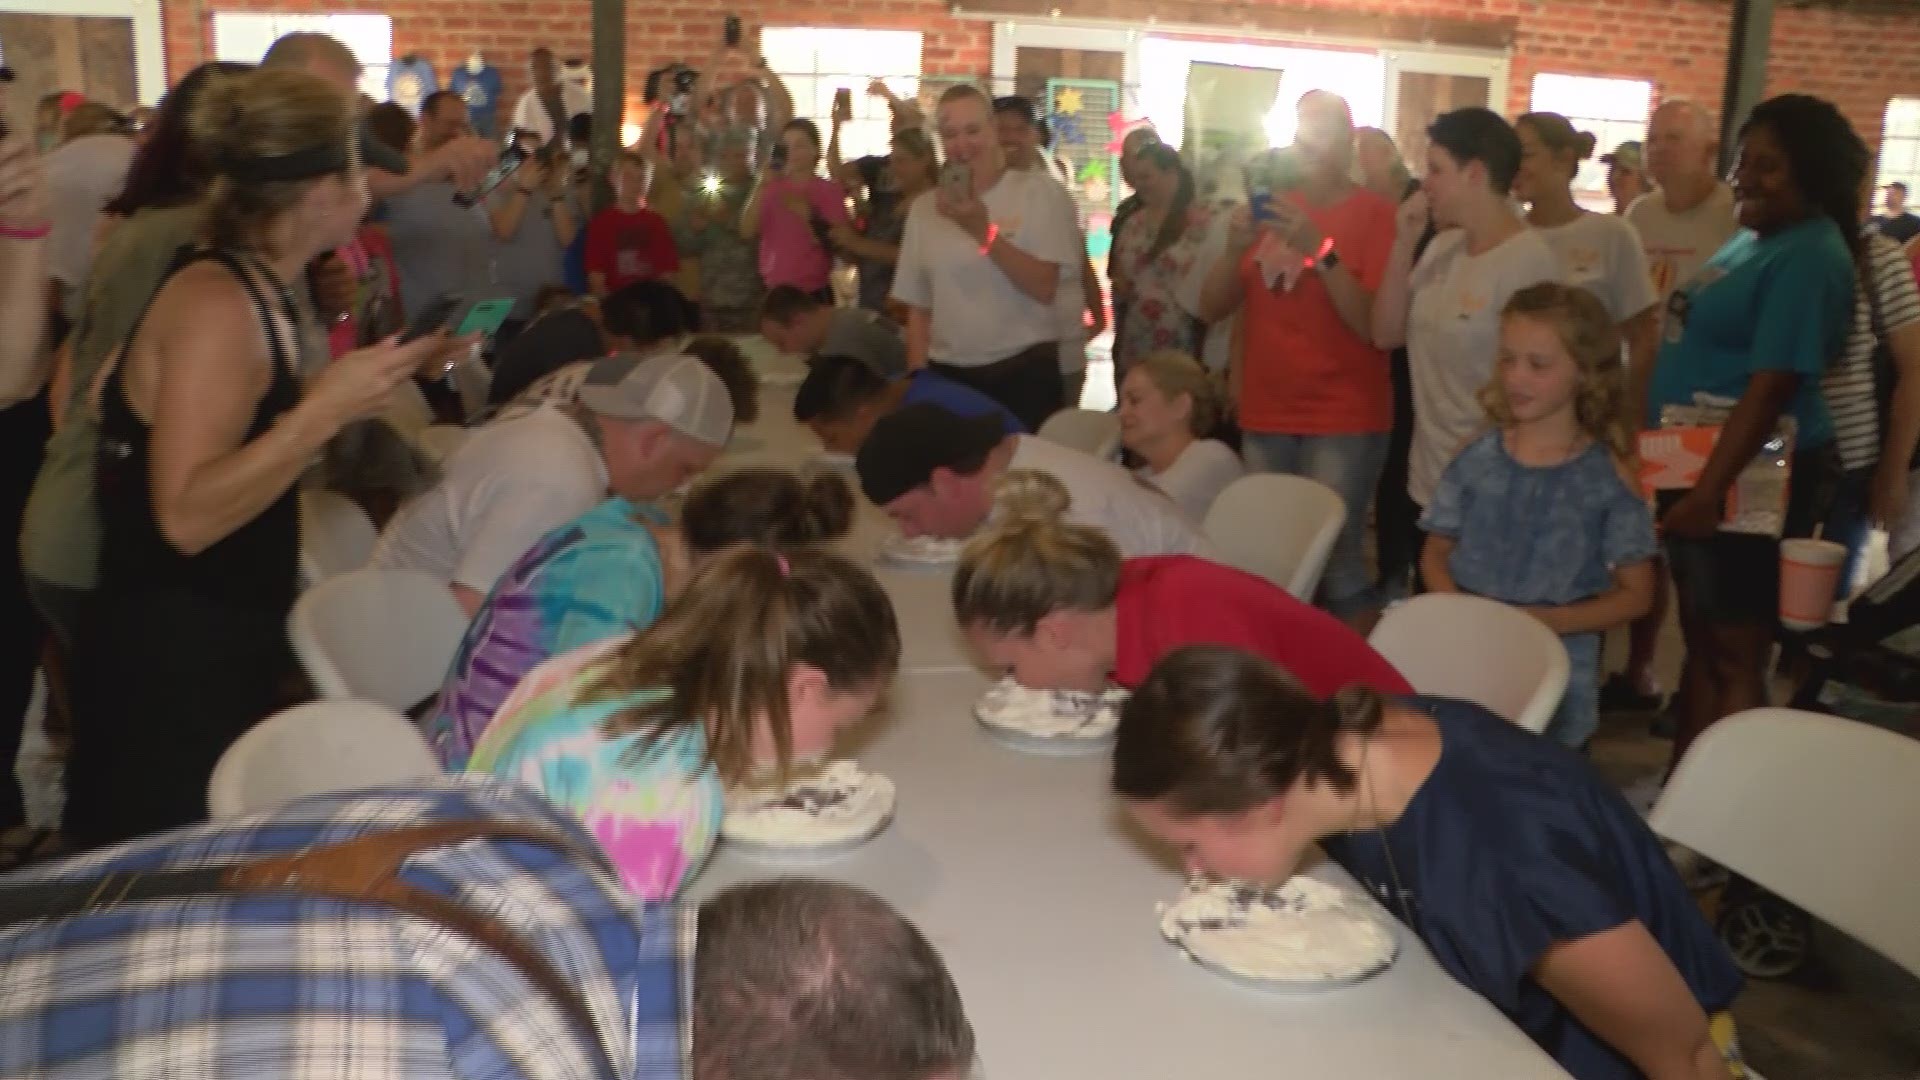 Highlights of the pie eating contest where contestants paid $10 to try to be the fastest to eat a whole Chocolate Meringue pie without using their hands. A messy good time to raise money for the Blue Santa program. The winners received a free Whataburger